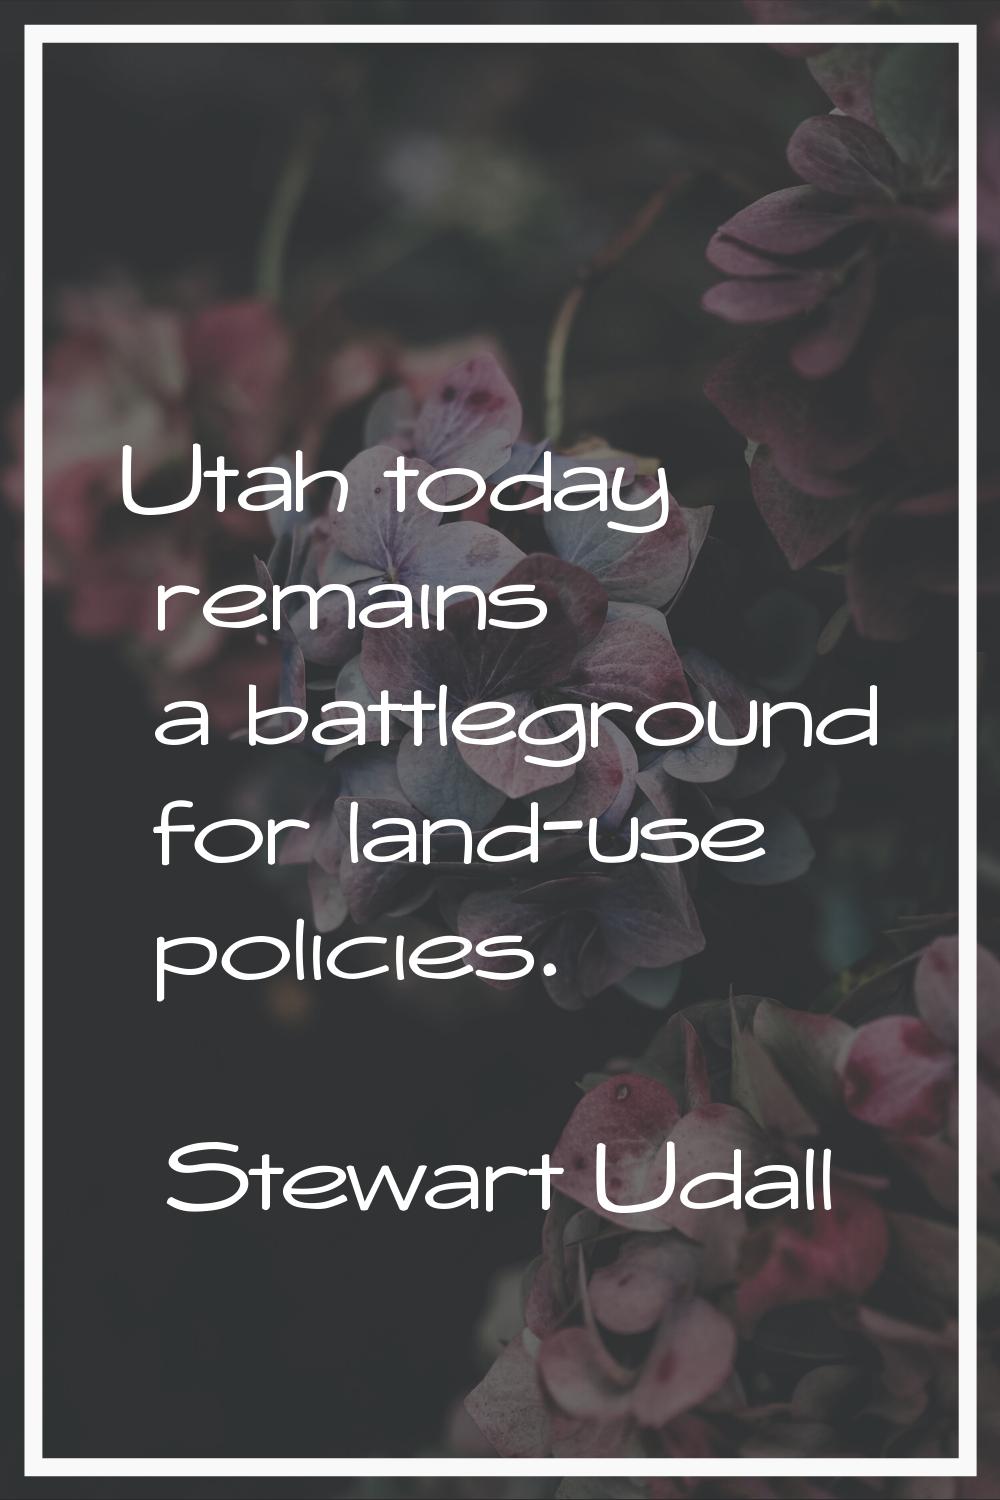 Utah today remains a battleground for land-use policies.